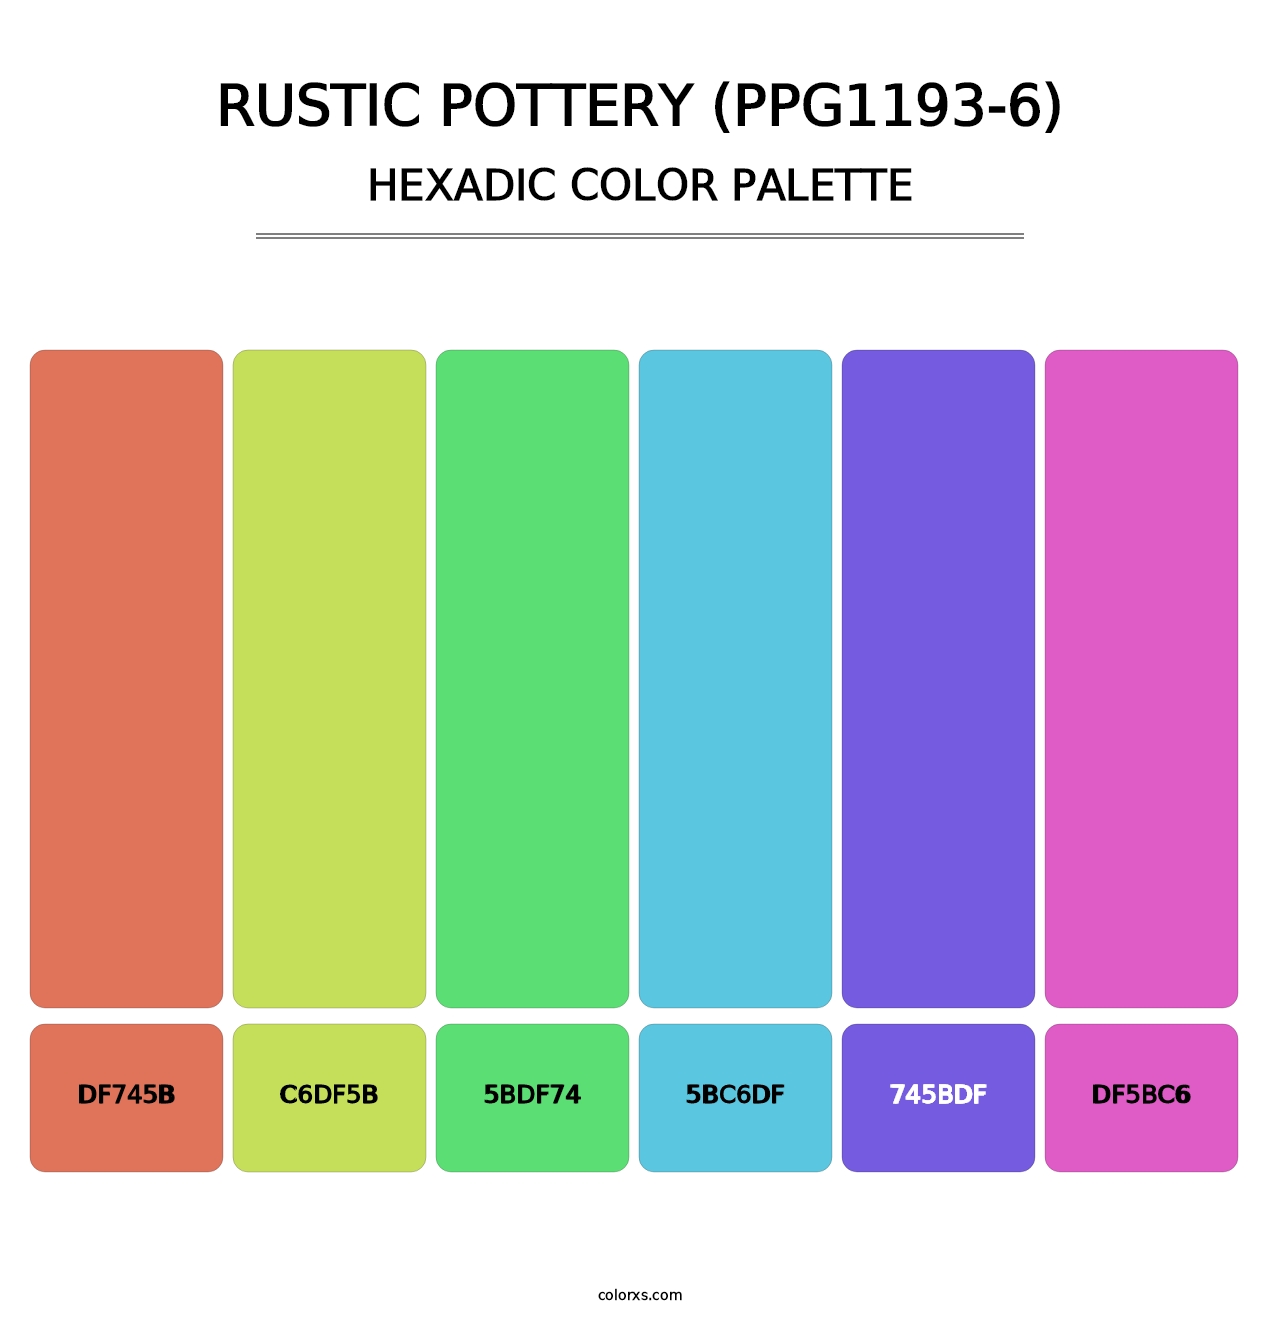 Rustic Pottery (PPG1193-6) - Hexadic Color Palette